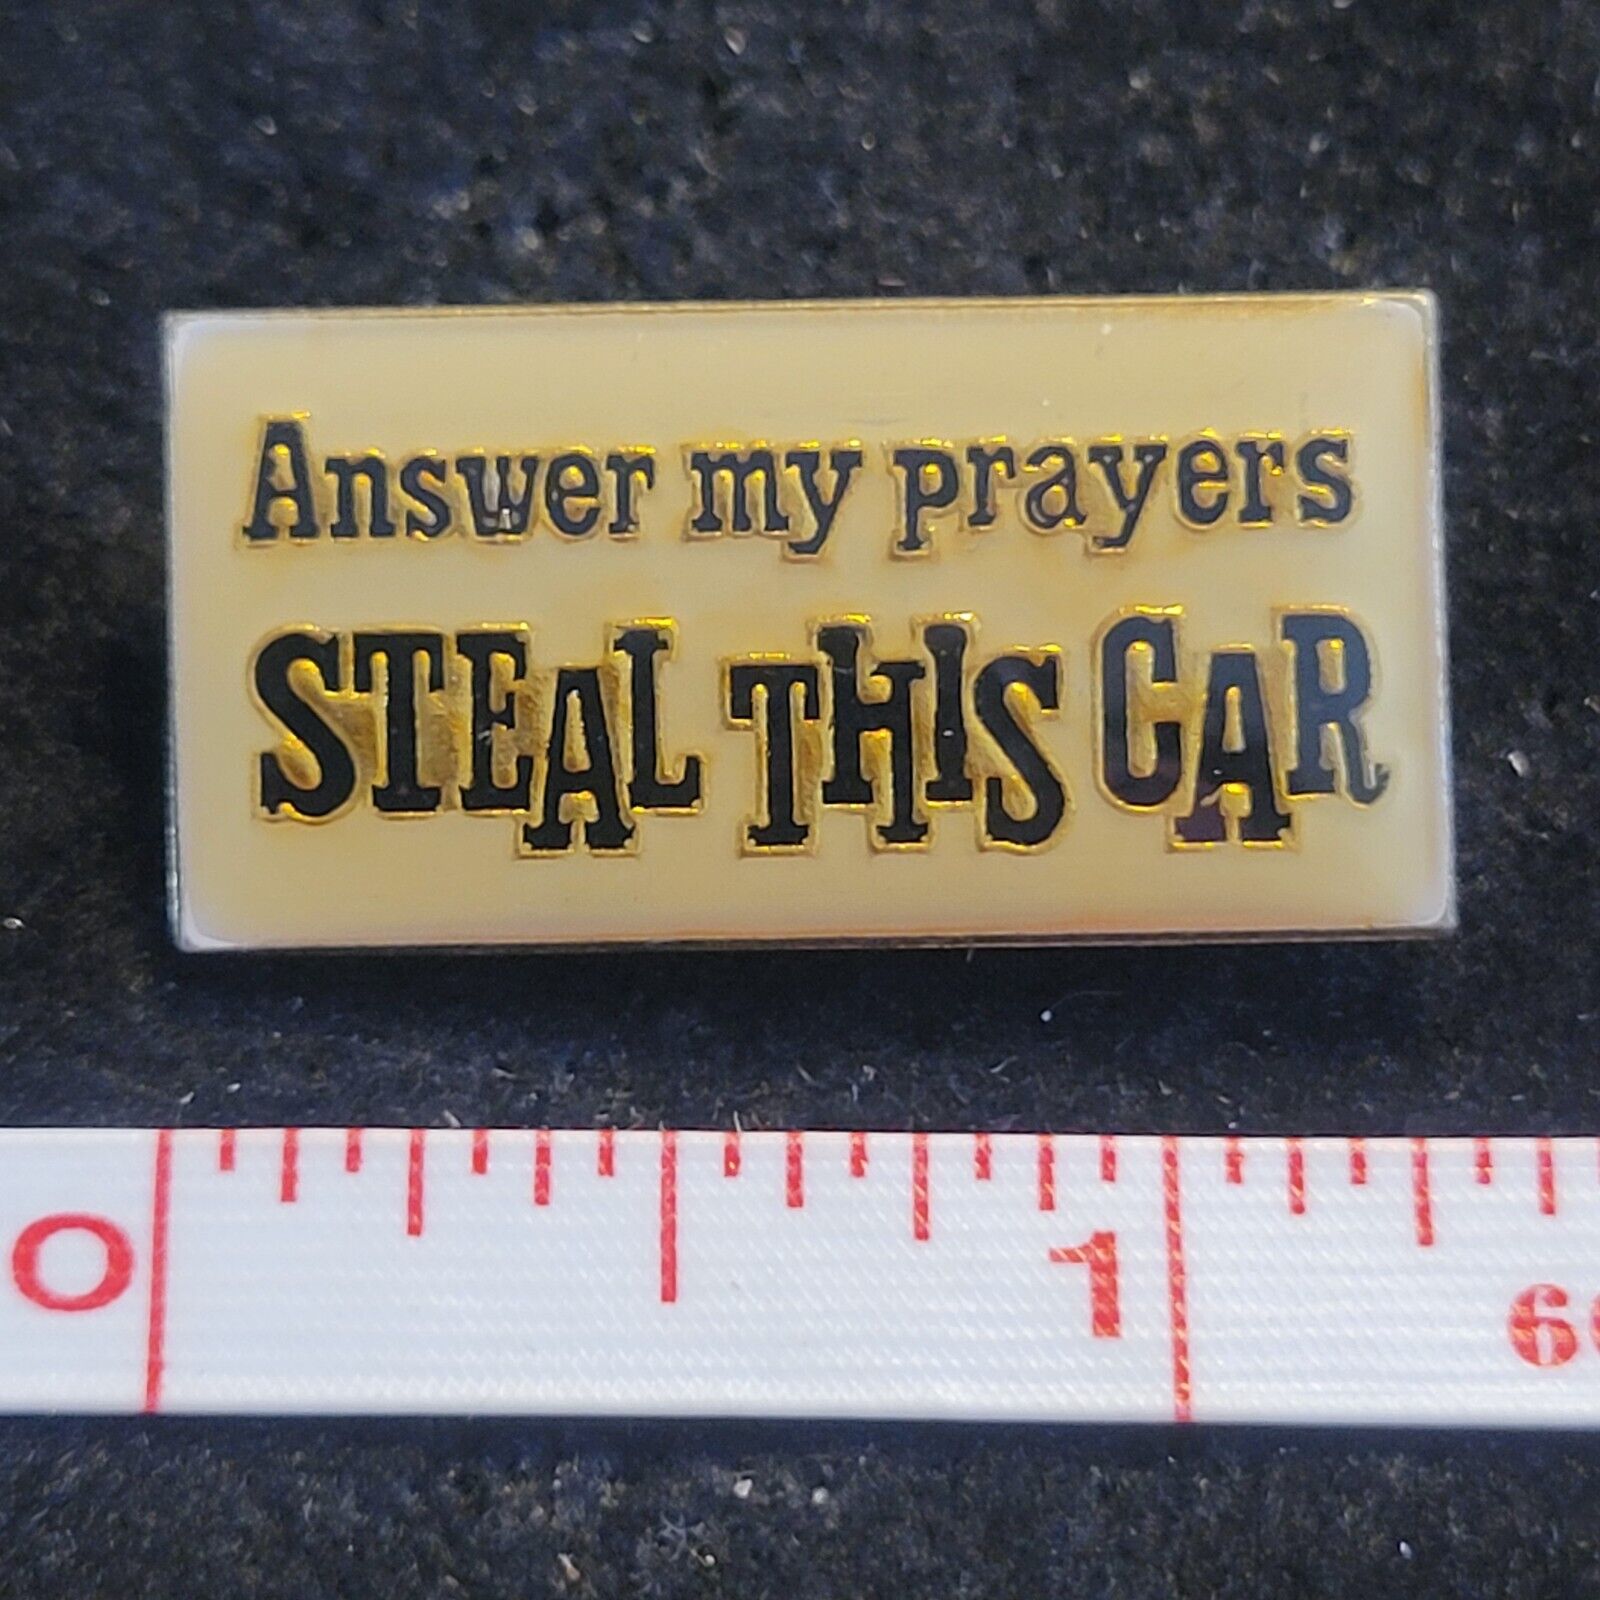 Answer My Prayers Steal this Car novelty Lapel Pin Hat Vest Tie Tack gold tone